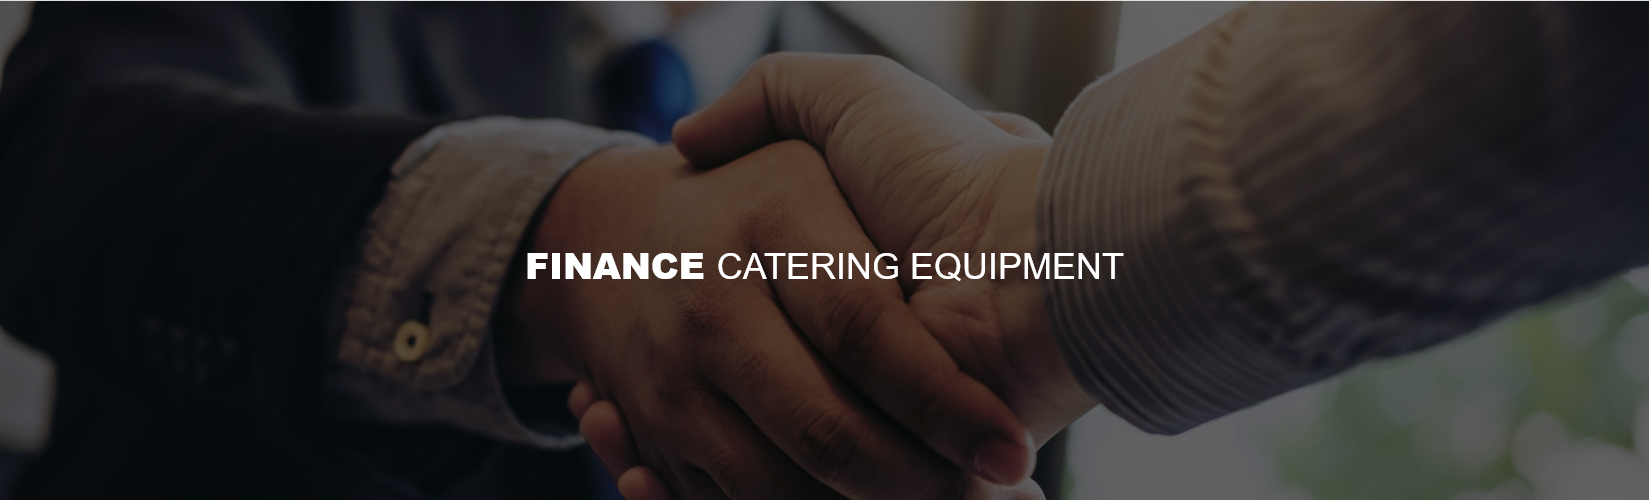 Finance Catering Equipment